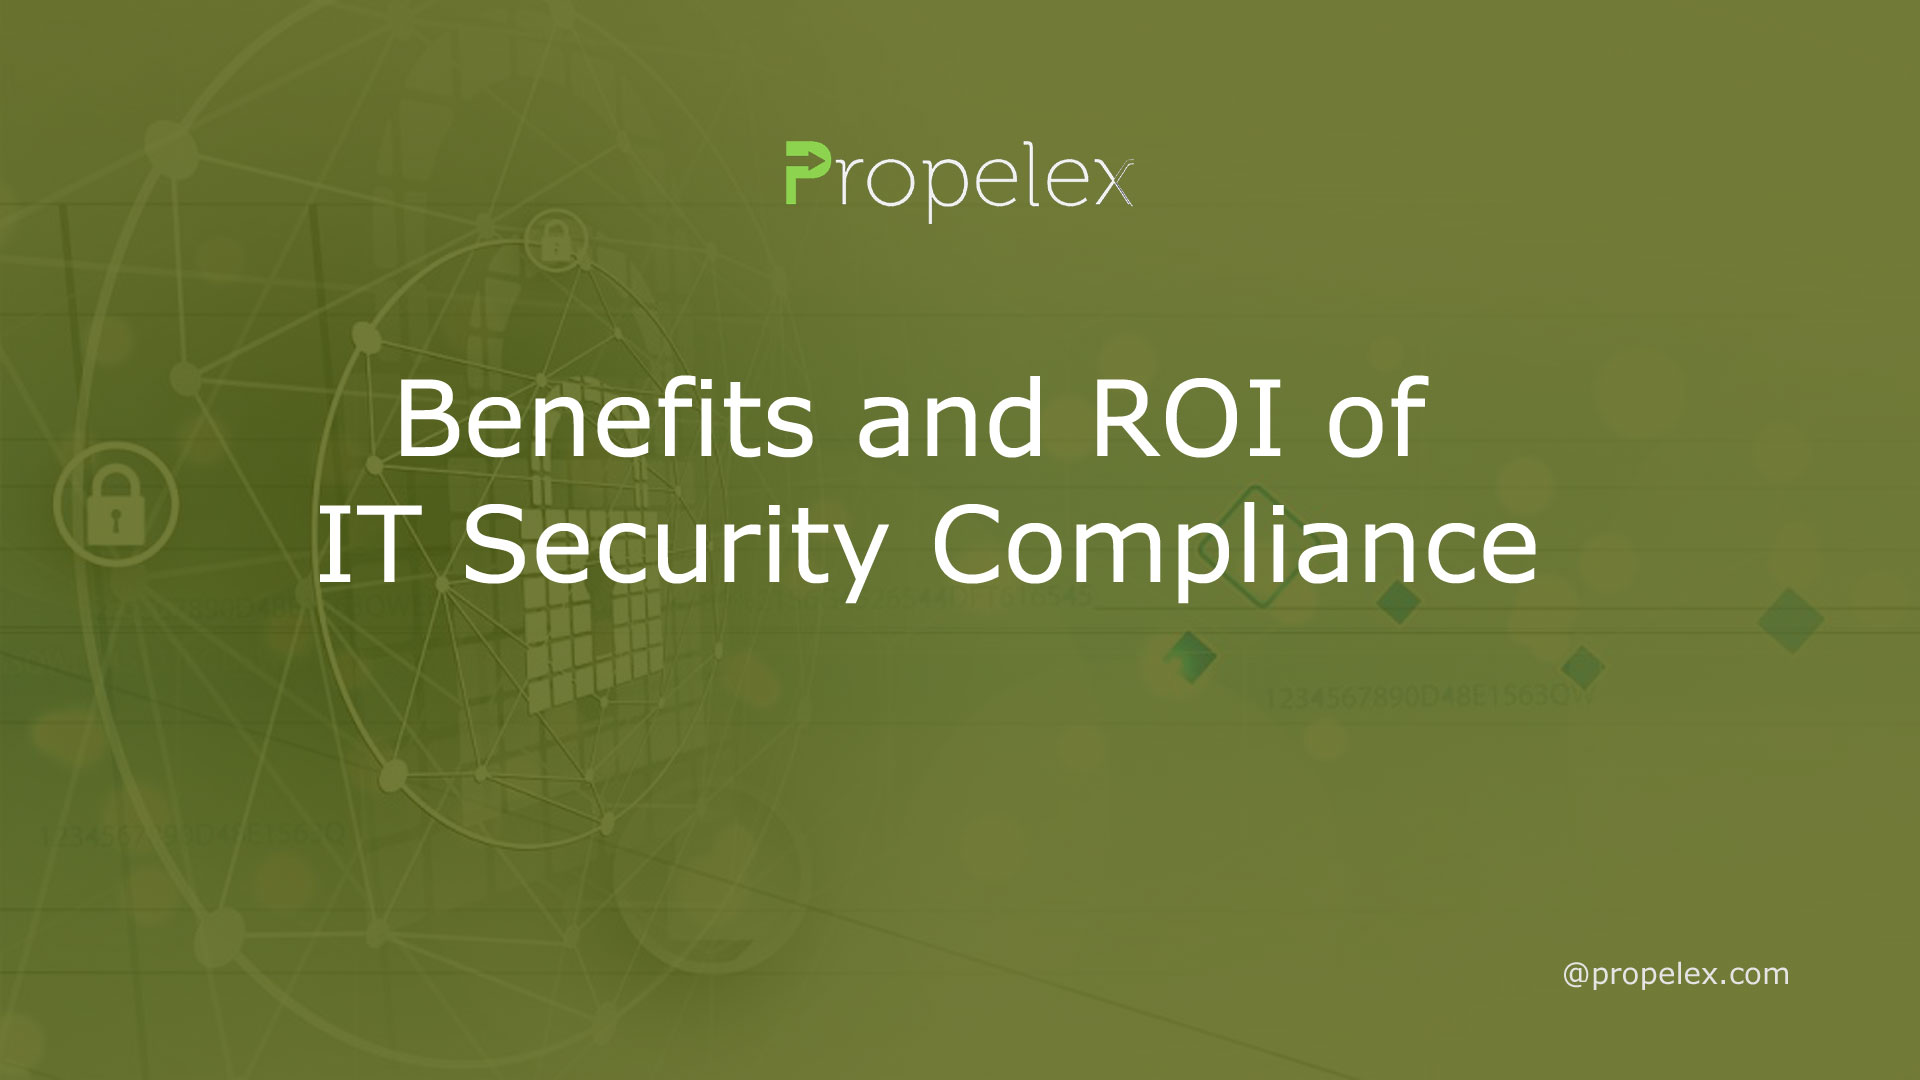 Benefits and ROI of IT Security Compliance